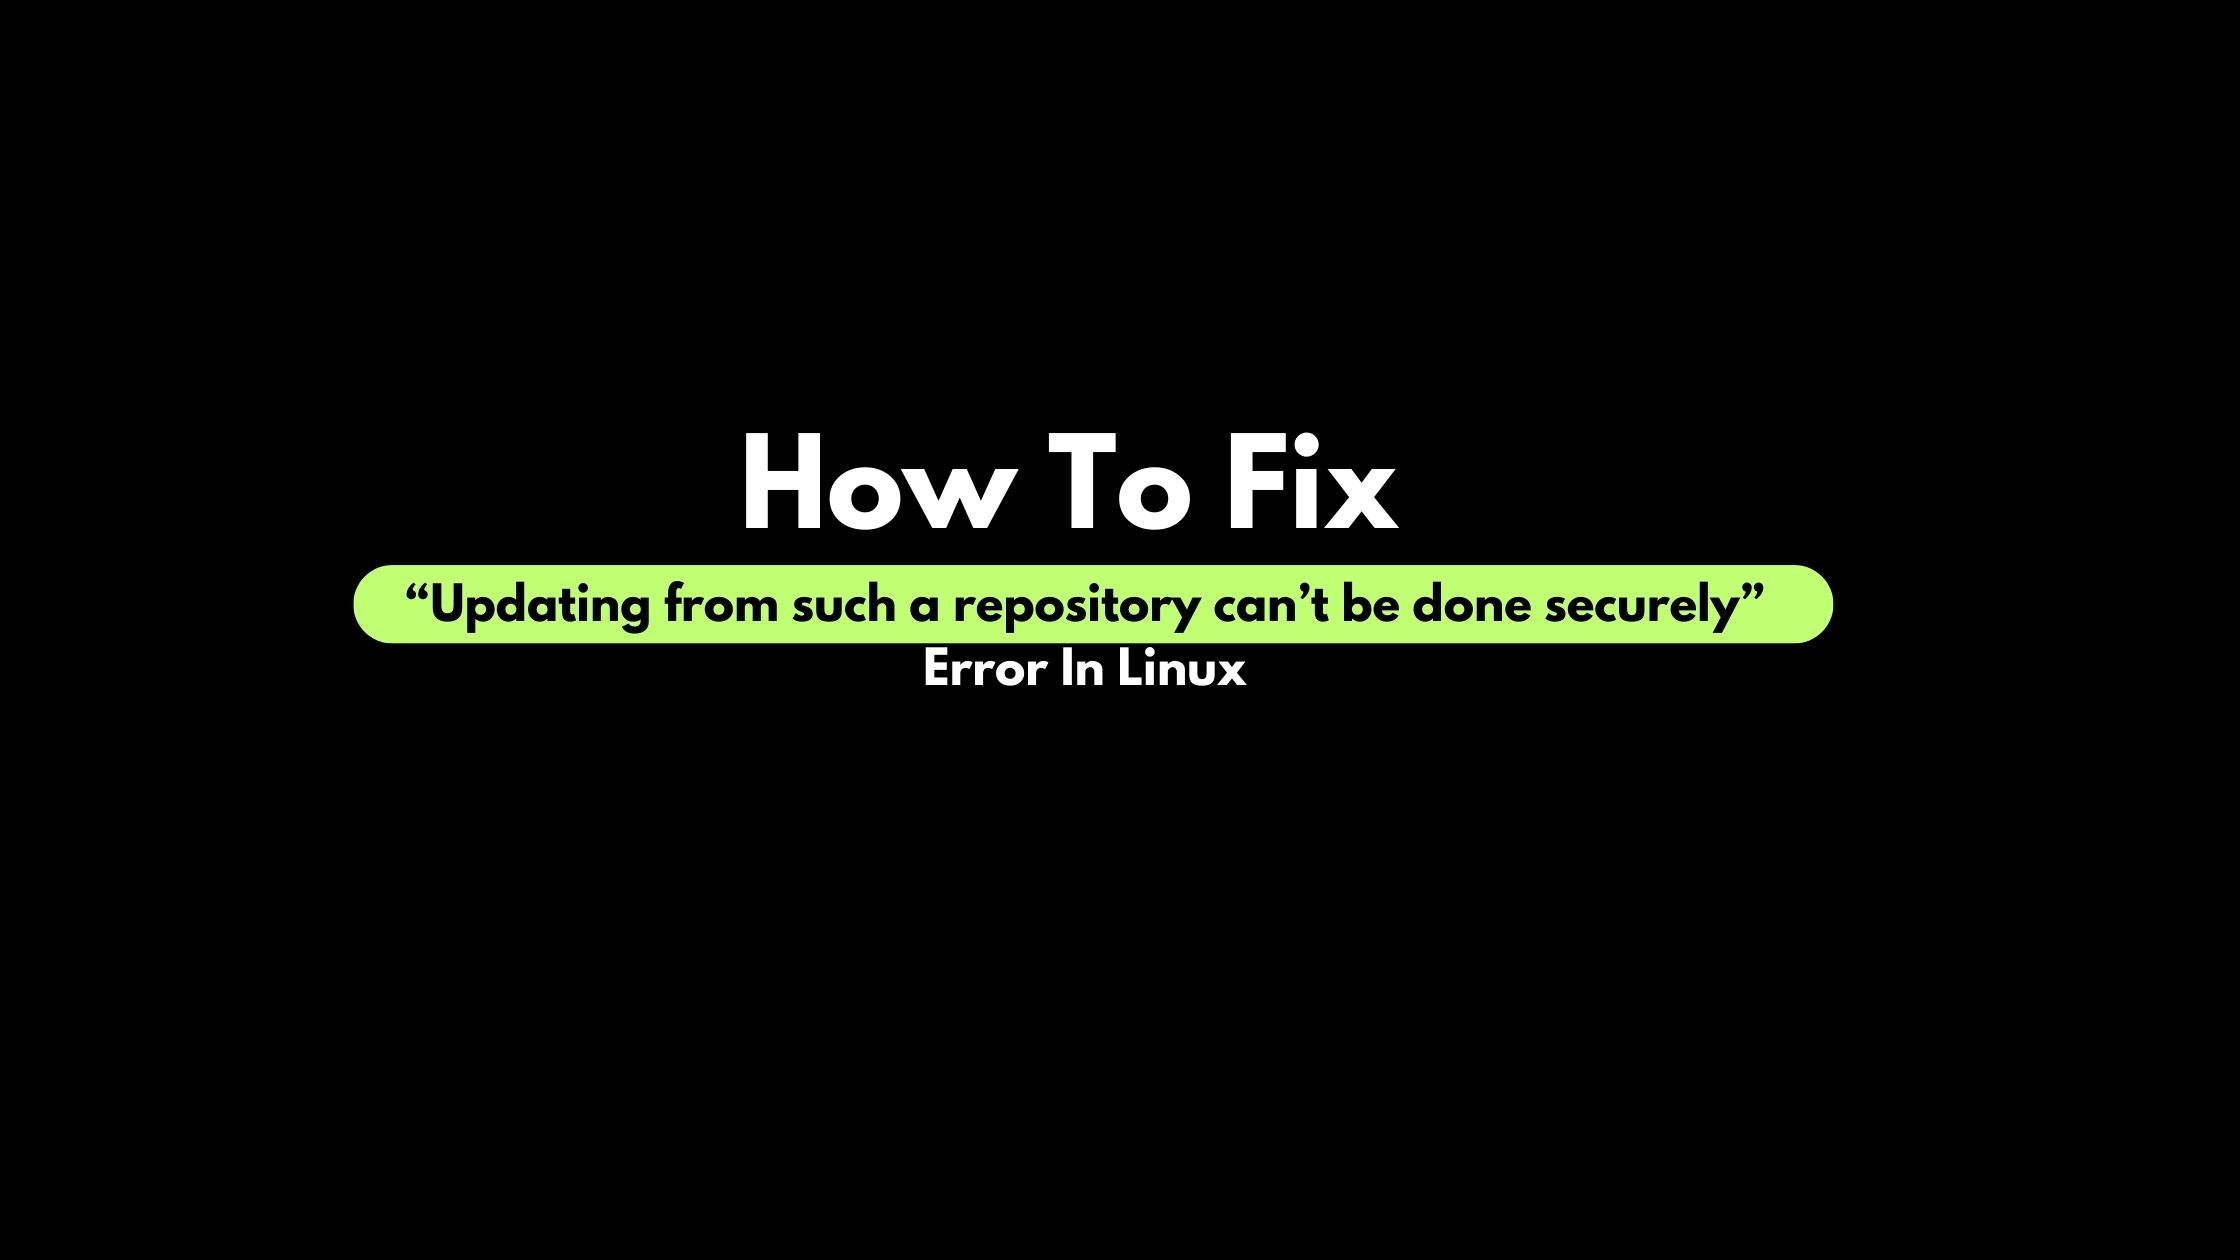 How To Fix “Updating from such a repository can’t be done securely” Error In Linux